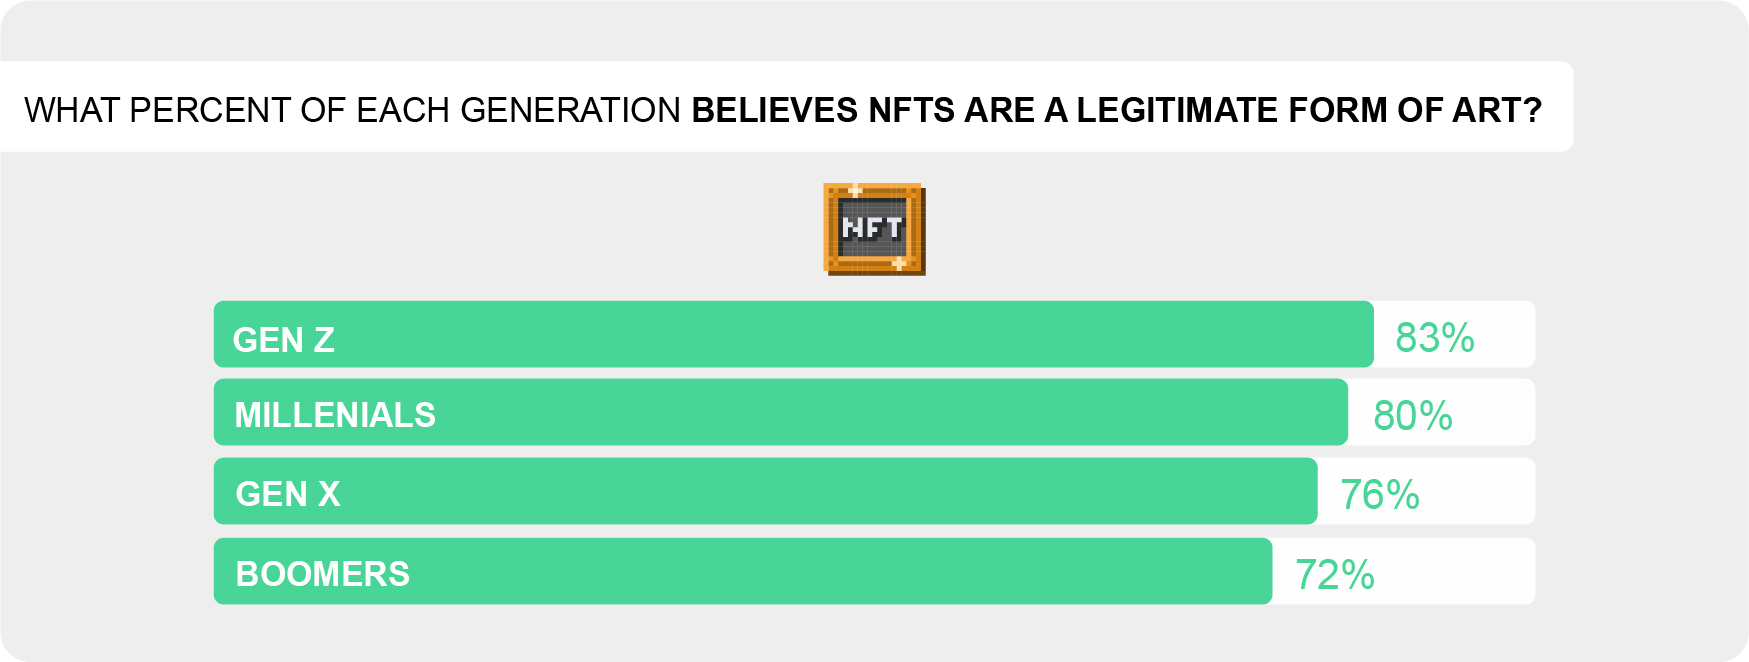 What percent of each generation believes NFTs are a legitimate form of art?